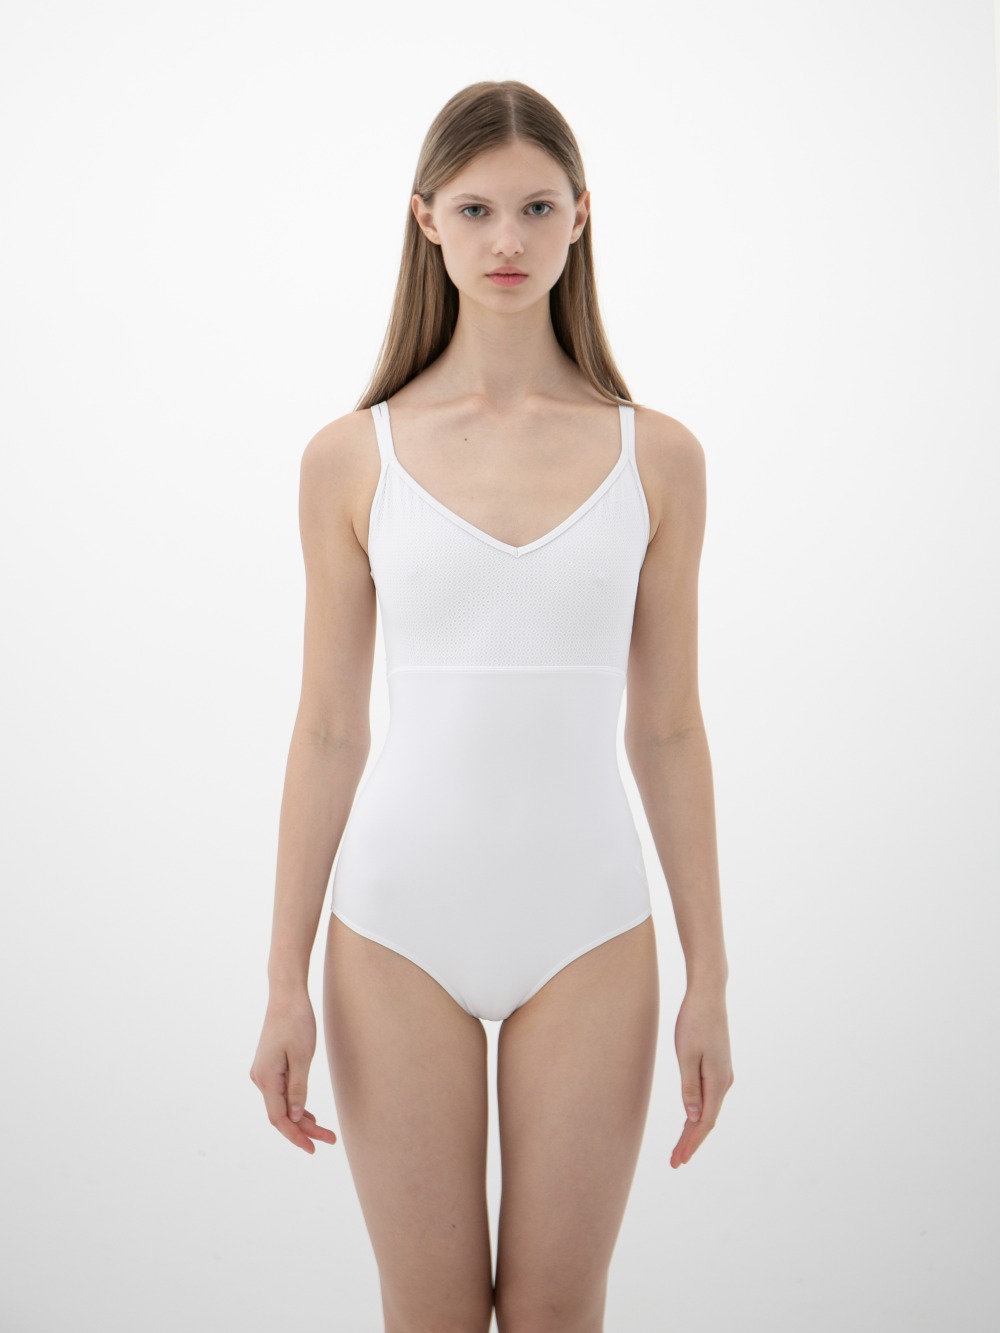 LACY LEOTARD FOR LADIES - WHITE